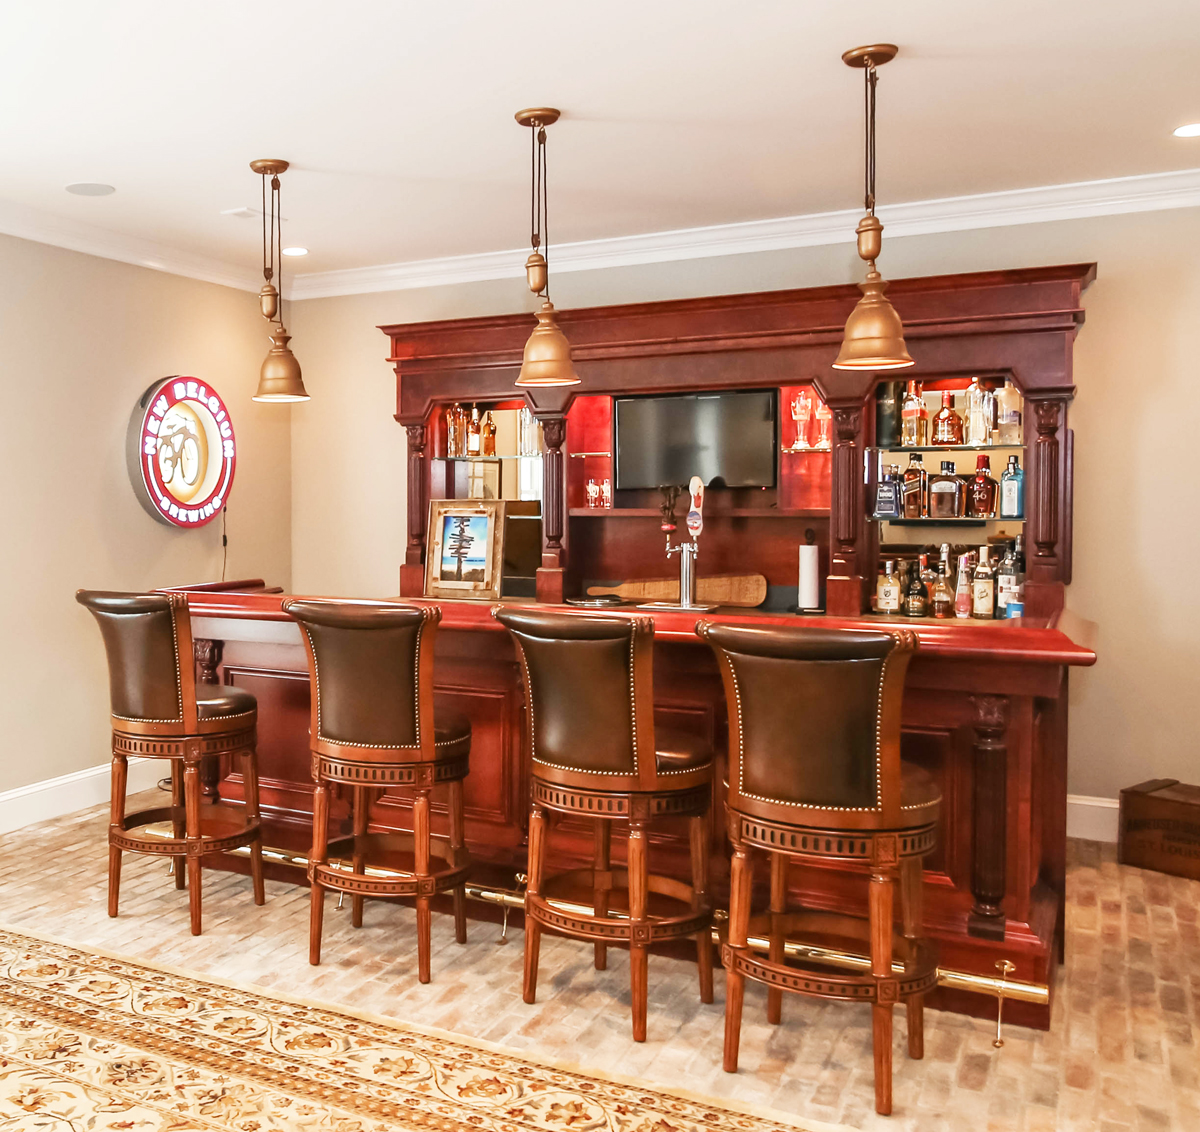 Traditional style fully-stocked bar in a newly remodeled home